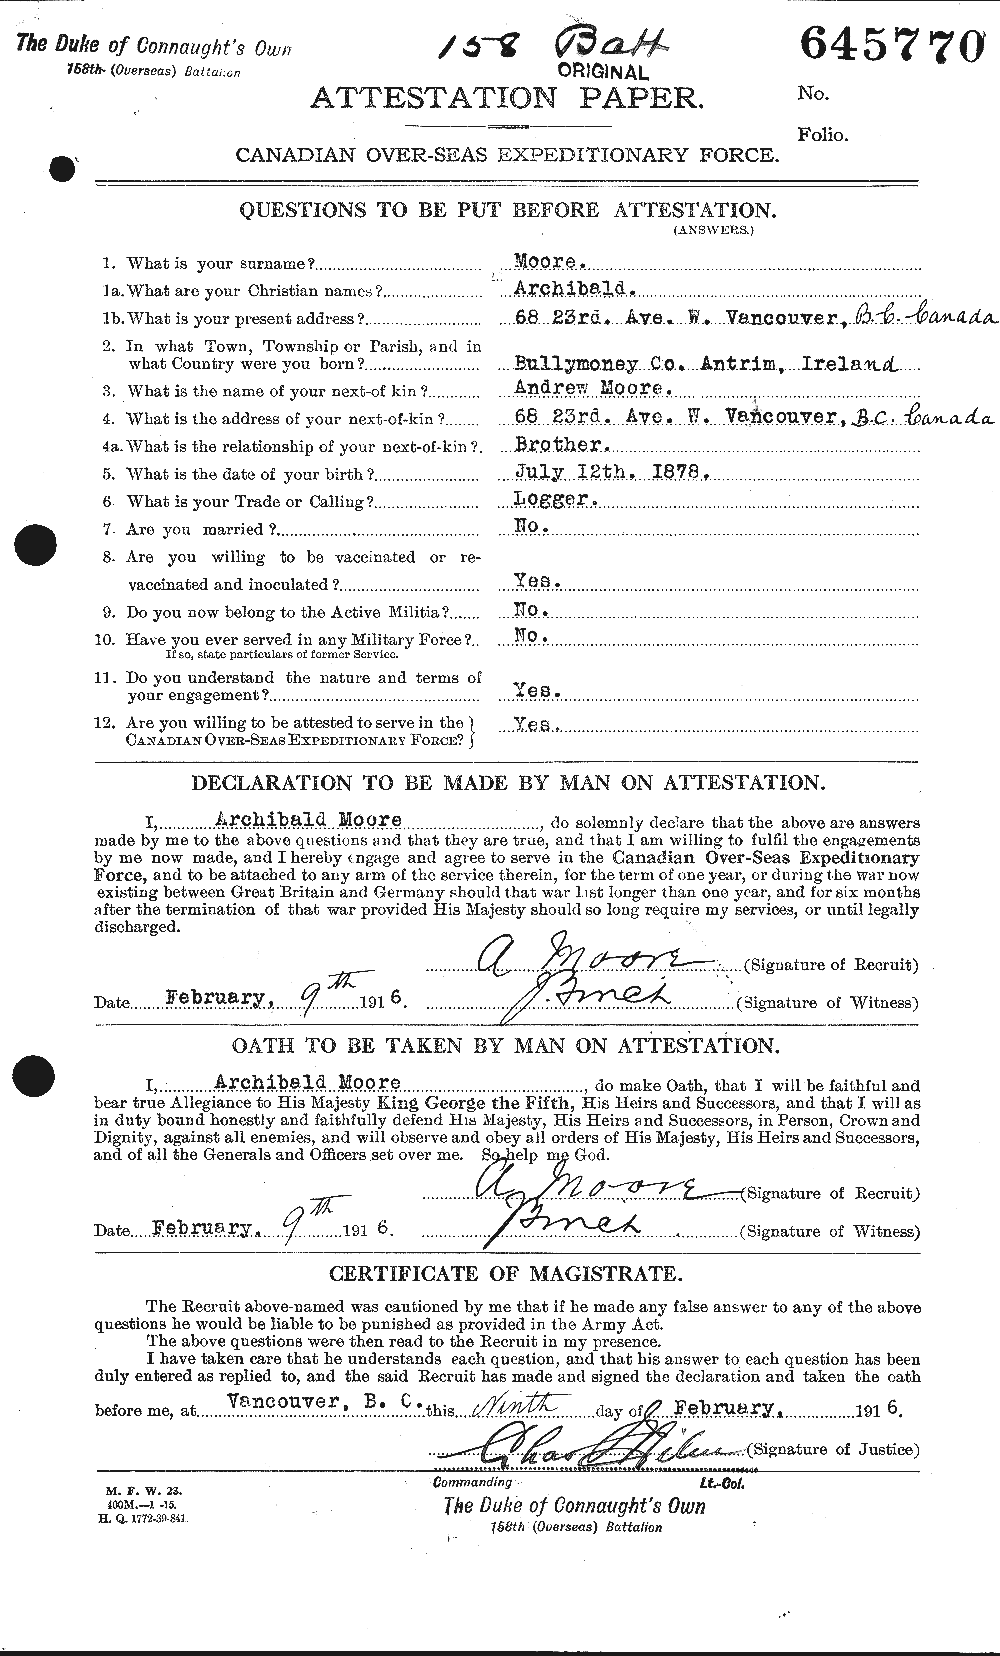 Personnel Records of the First World War - CEF 506418a